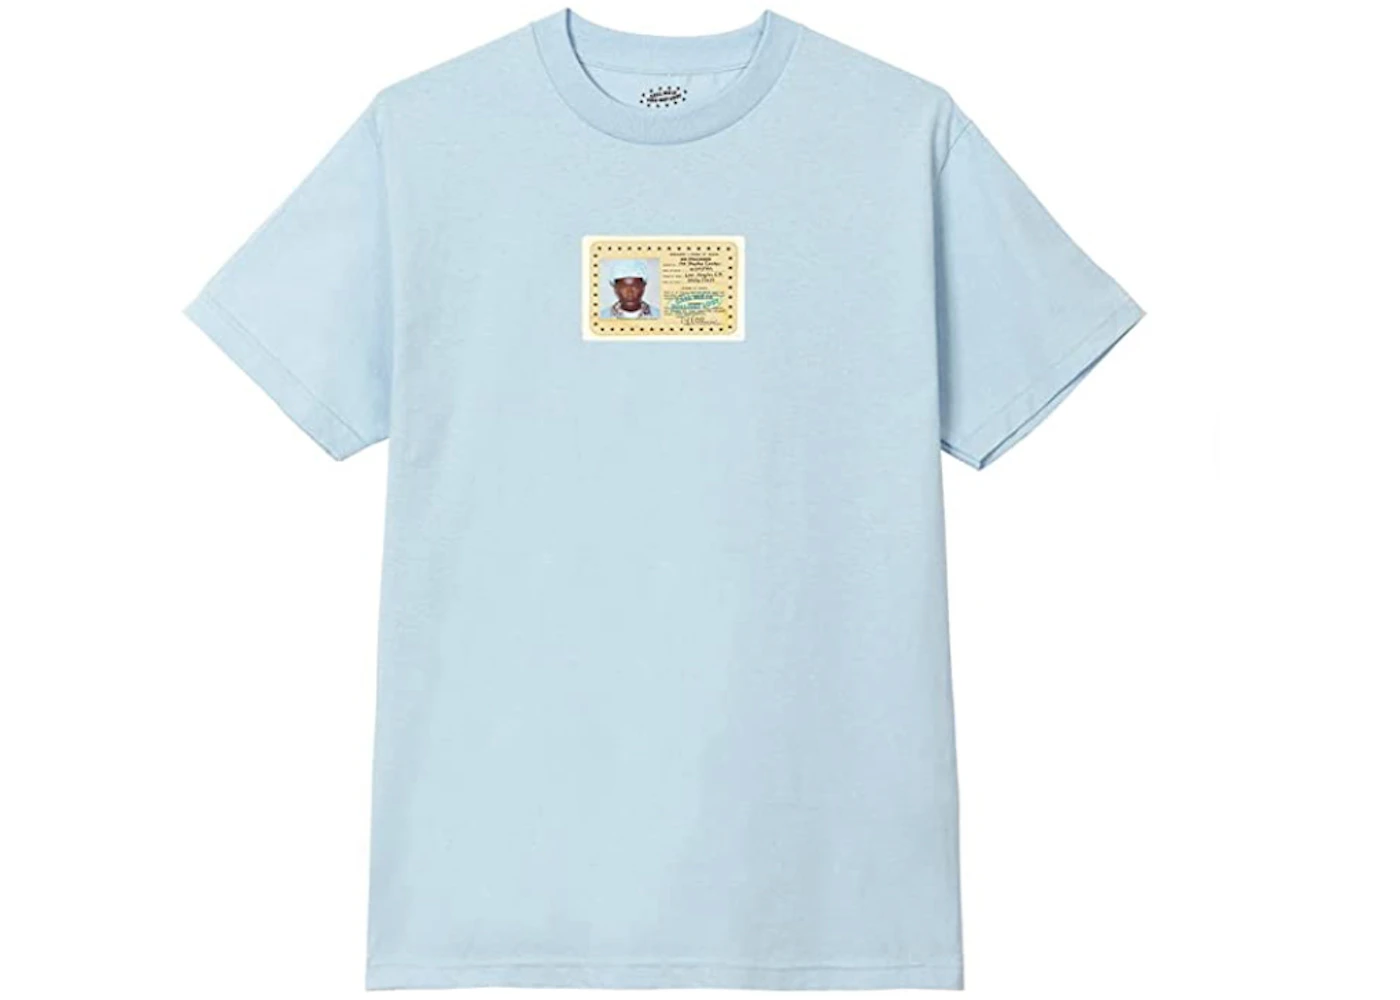 Unfavorable fascism Revive Tyler, the Creator Call Me if You Get Lost License T-shirt Light Blue -  SS22 - US